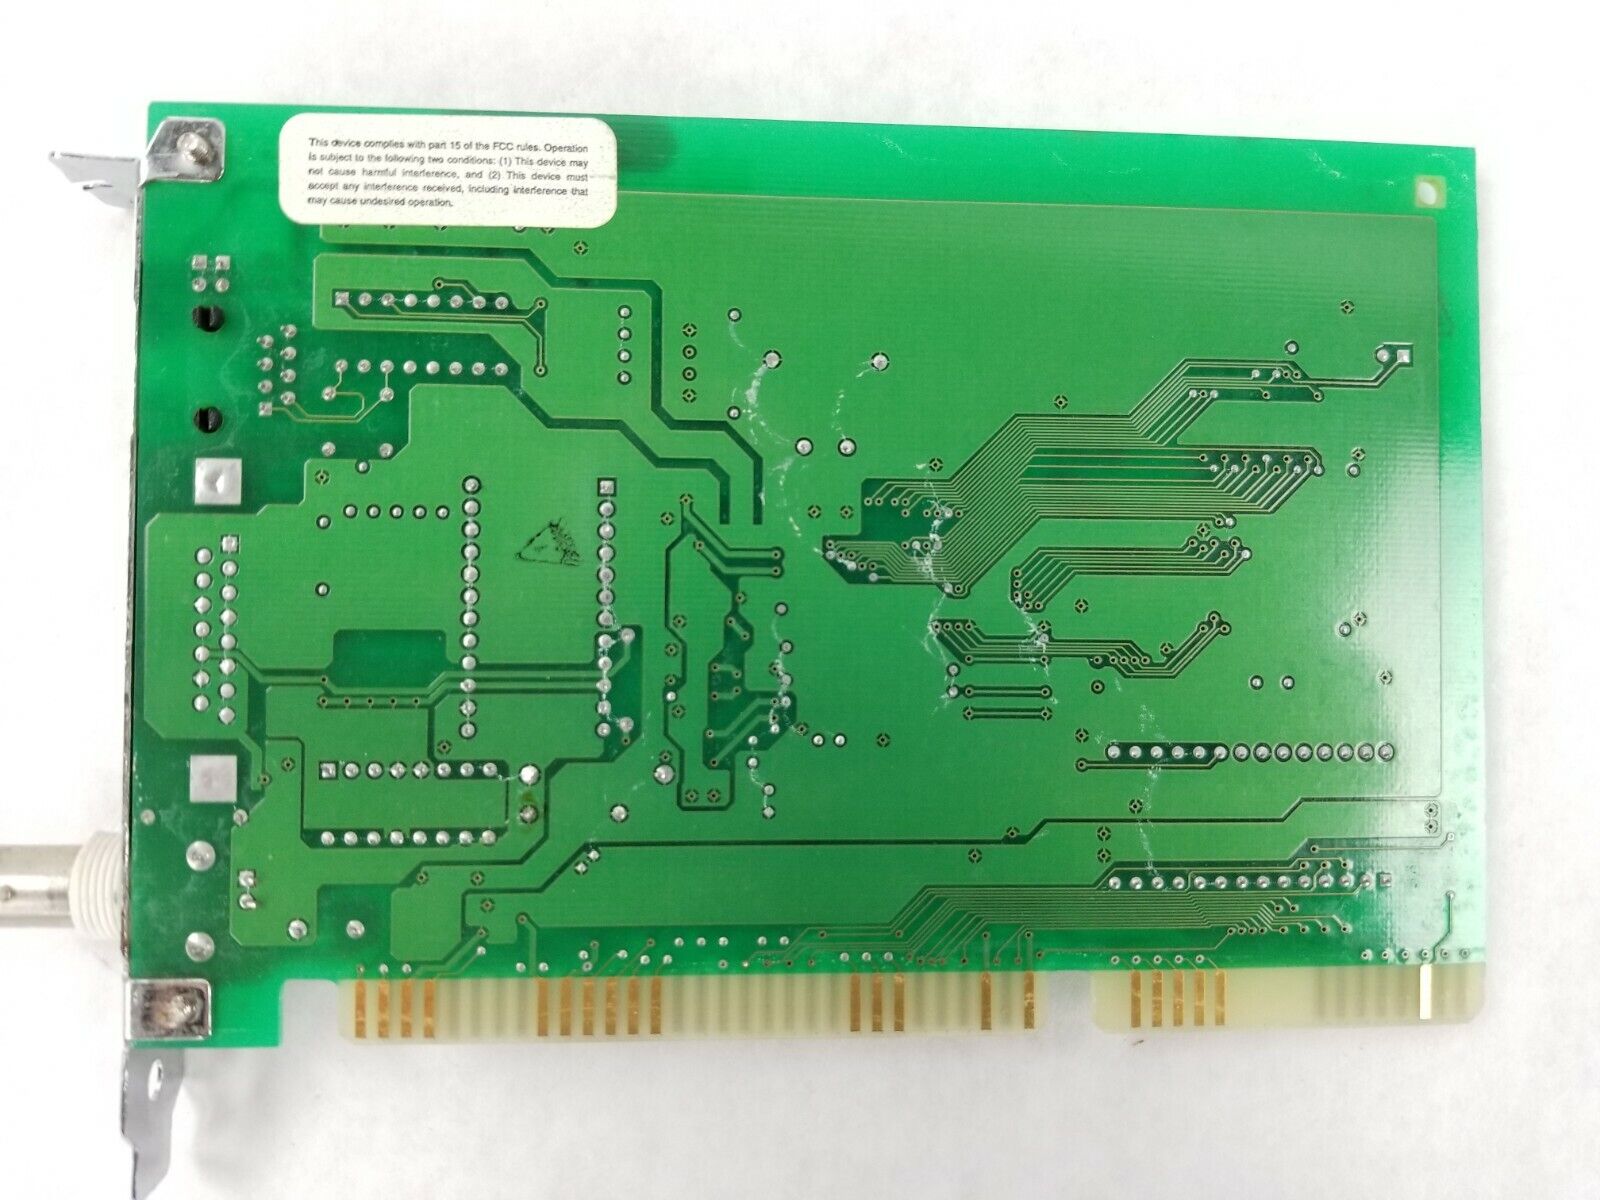 Alta Research Ethervalue 16Bit ISA Network Card.